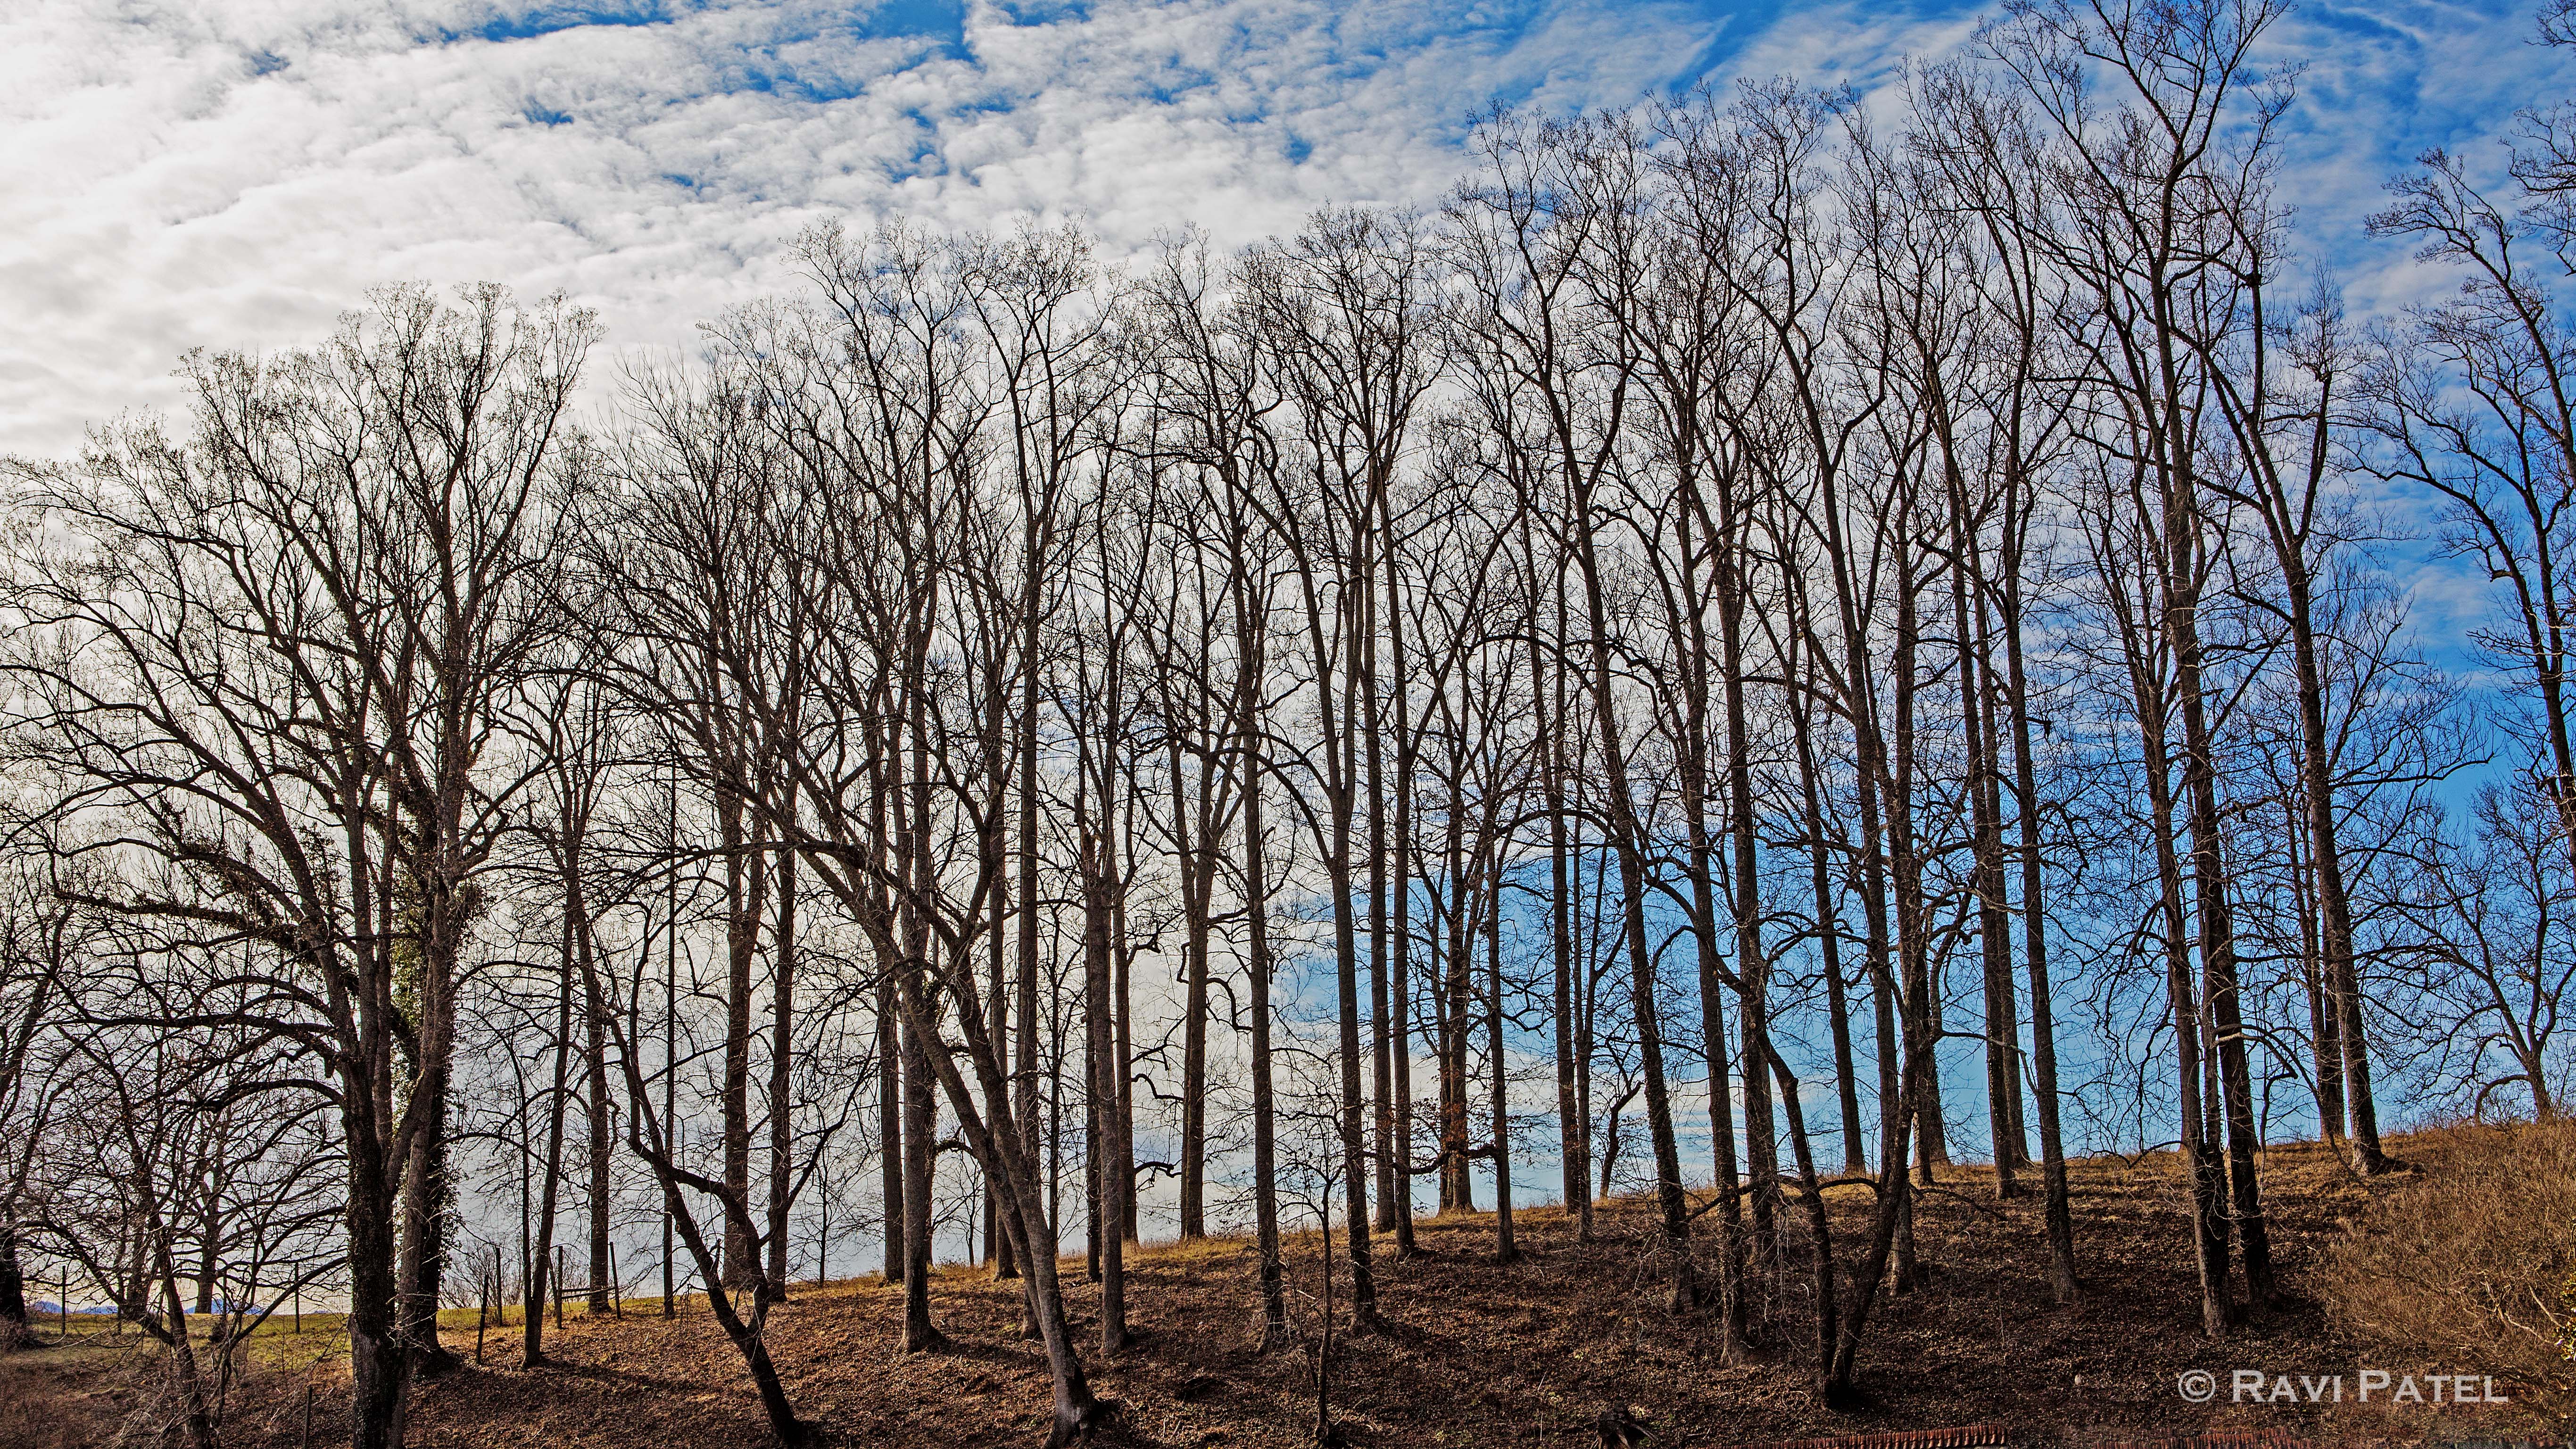 A Row of Bare Trees | Photos by Ravi